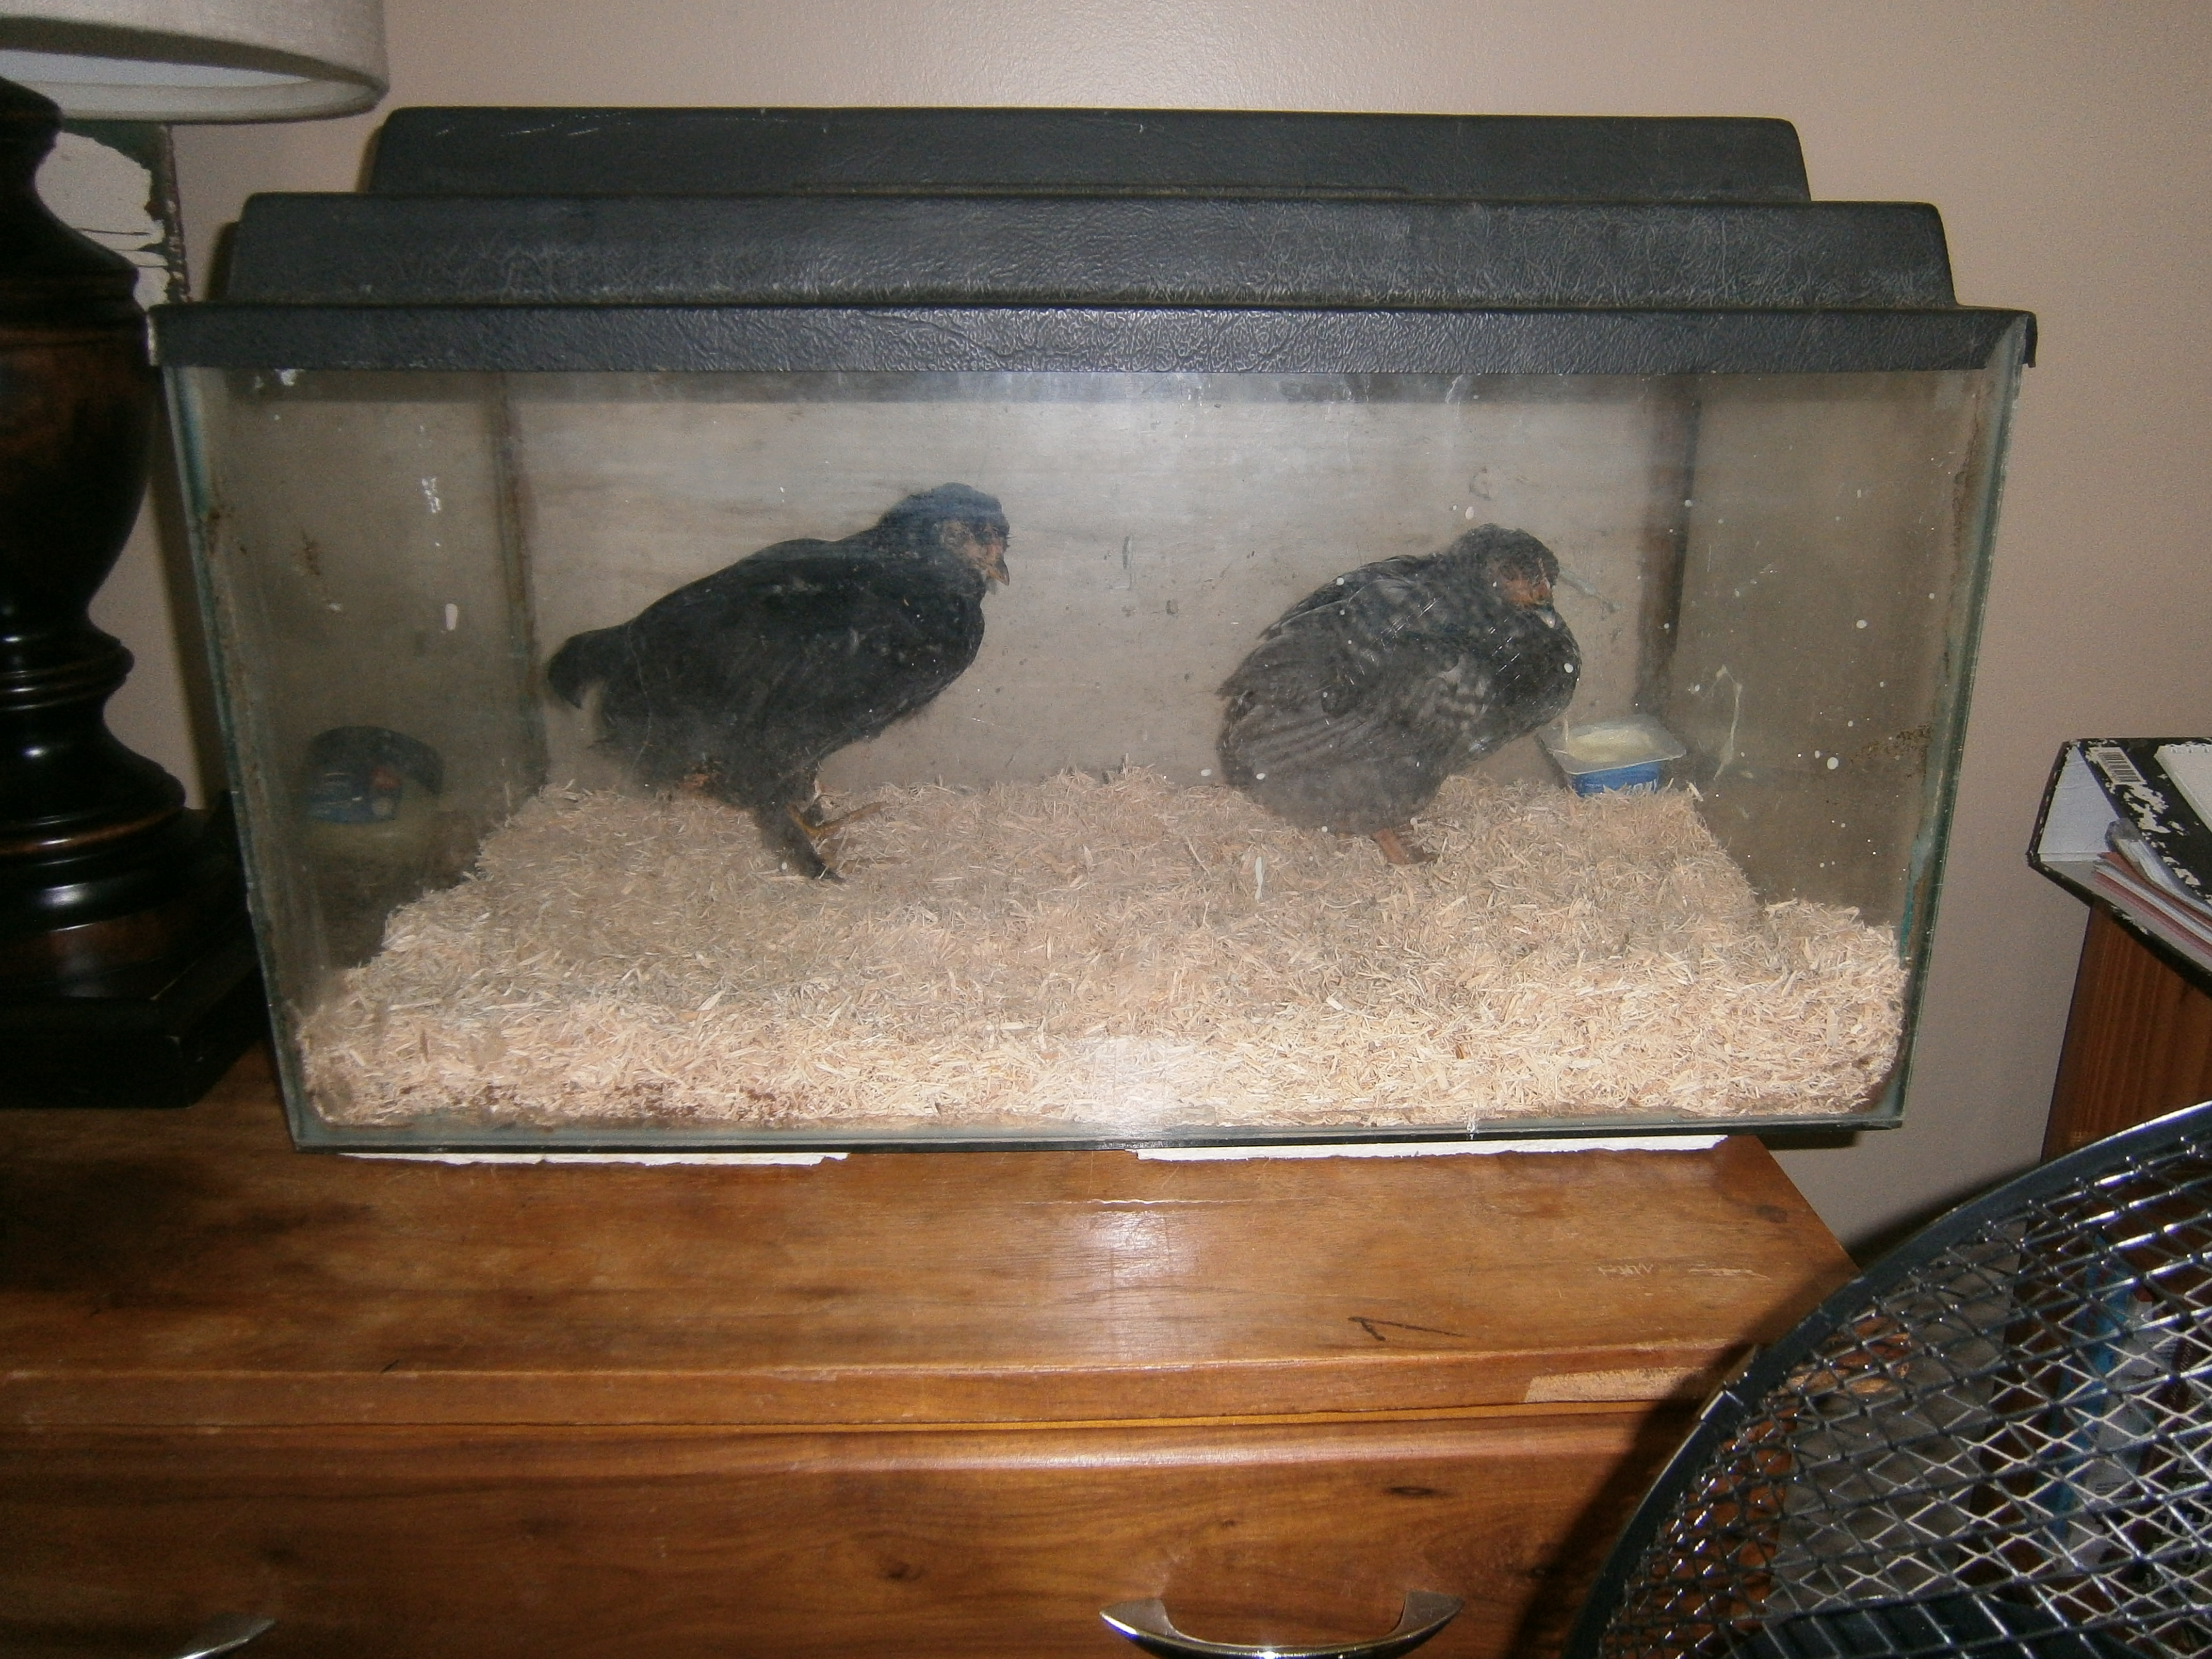 Nugget and Sugar in the "Get Well Tank"